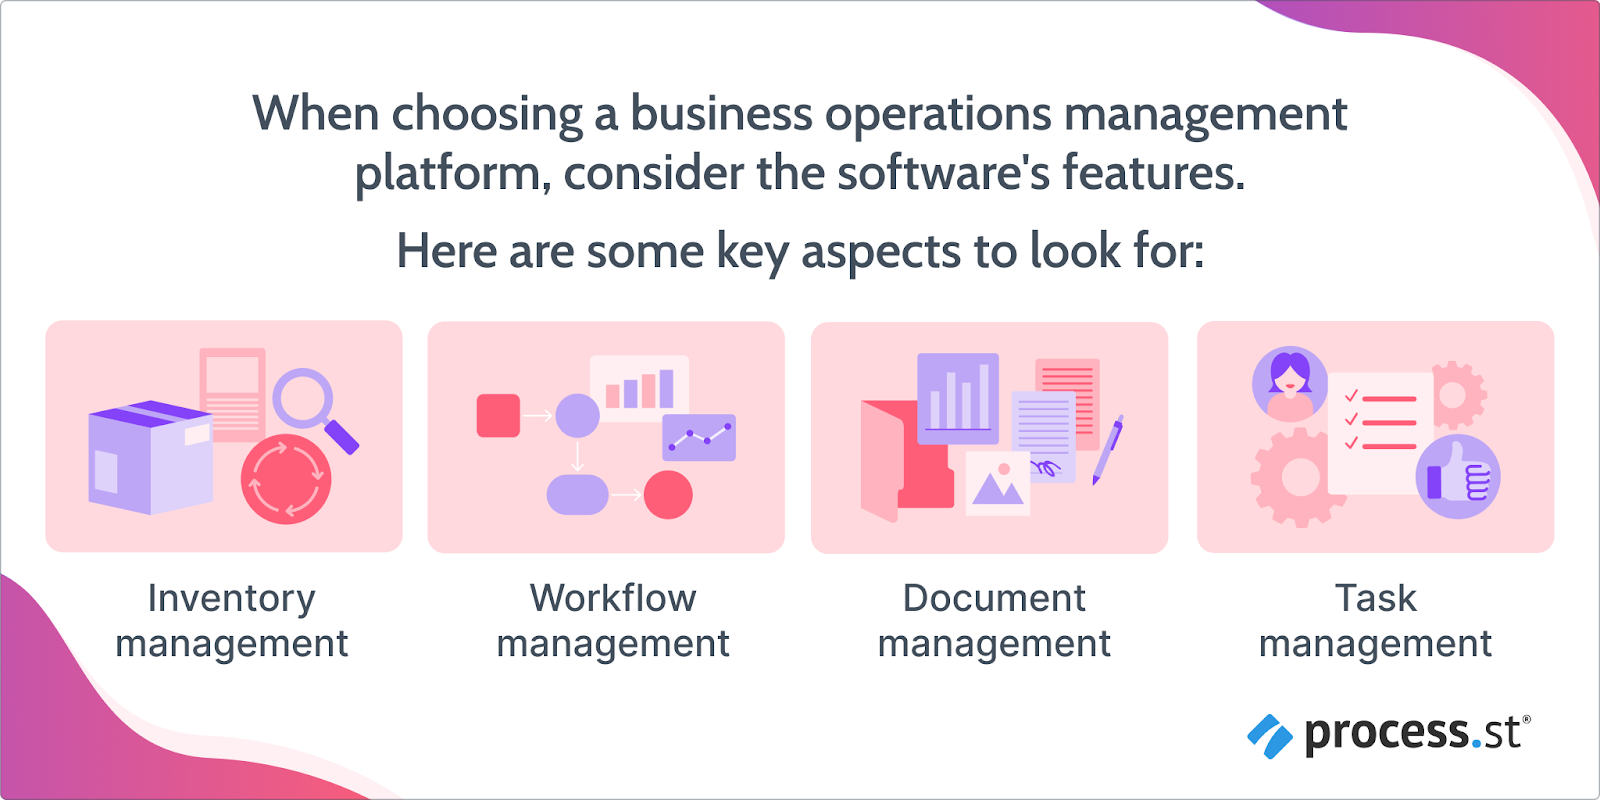 Image showing key features of a business operations management platform